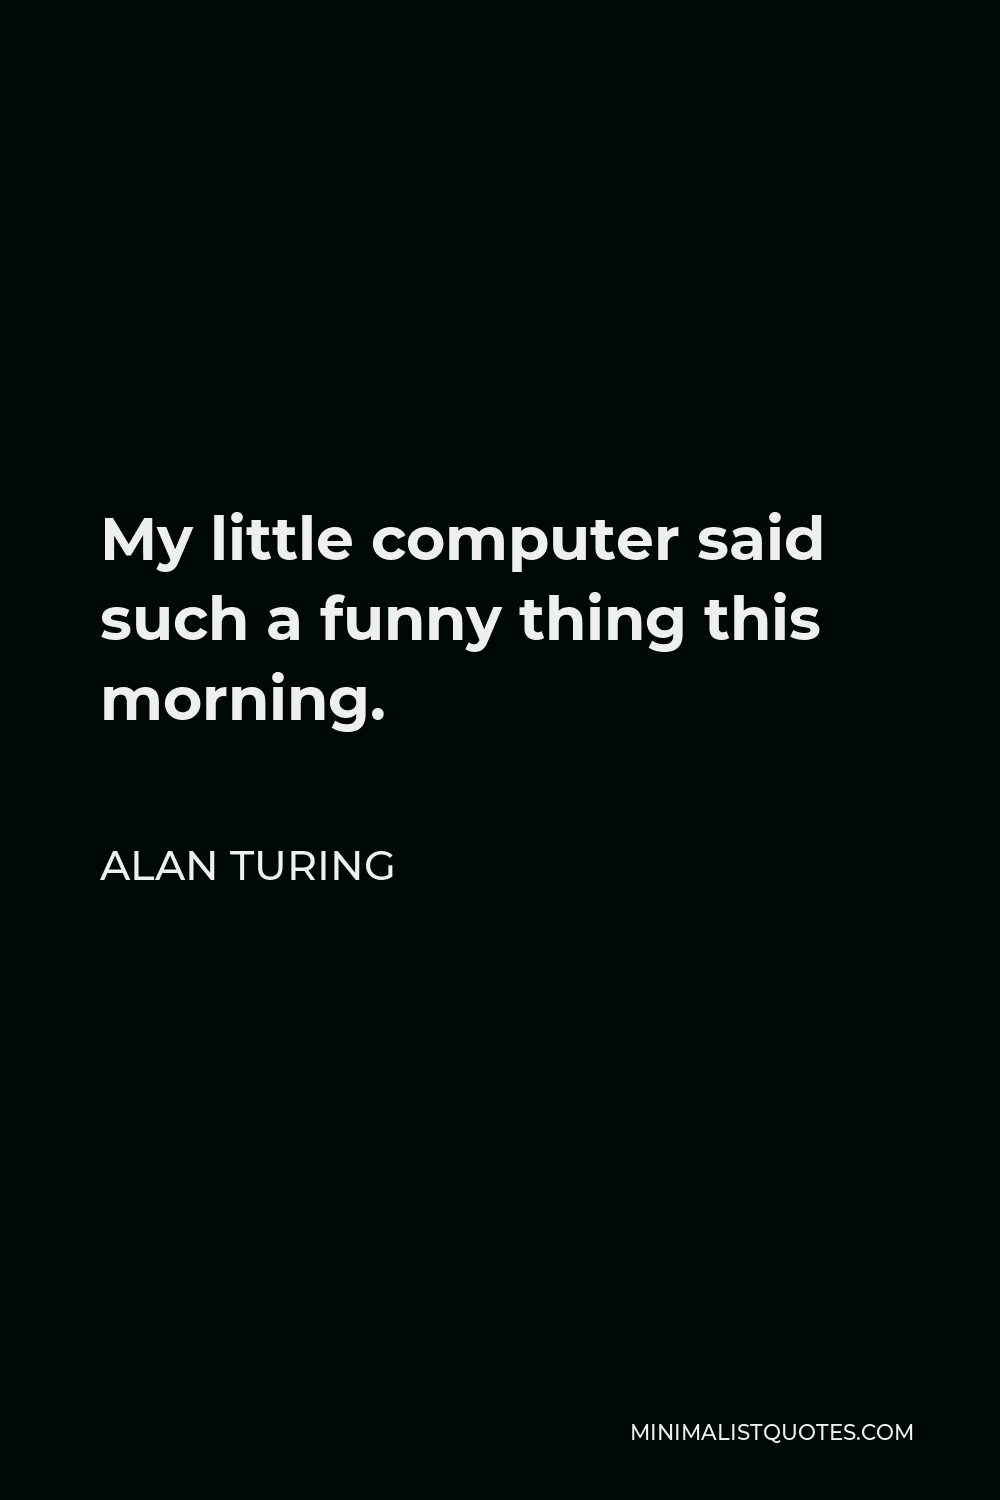 Alan Turing Quote - My little computer said such a funny thing this morning.